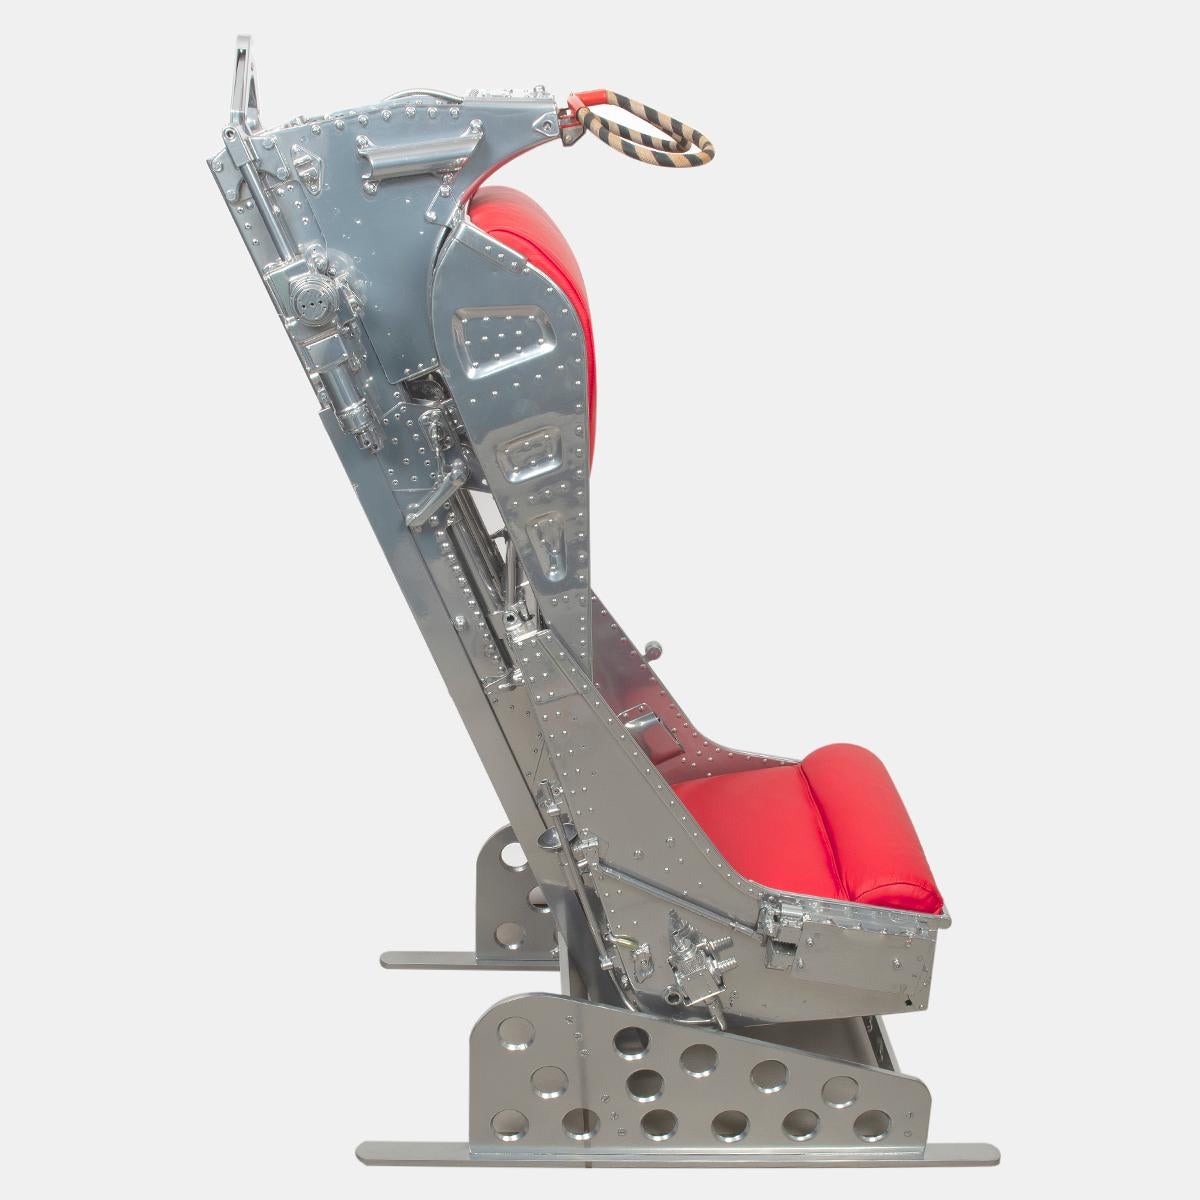 An upward fire ejection seat, deactivated, from a De Havilland Sea Vixen, manufactured and issued/ certified 1960. Now, restored and converted into a perfect and fully functioning domestic or office seat, this has been professionally stripped to